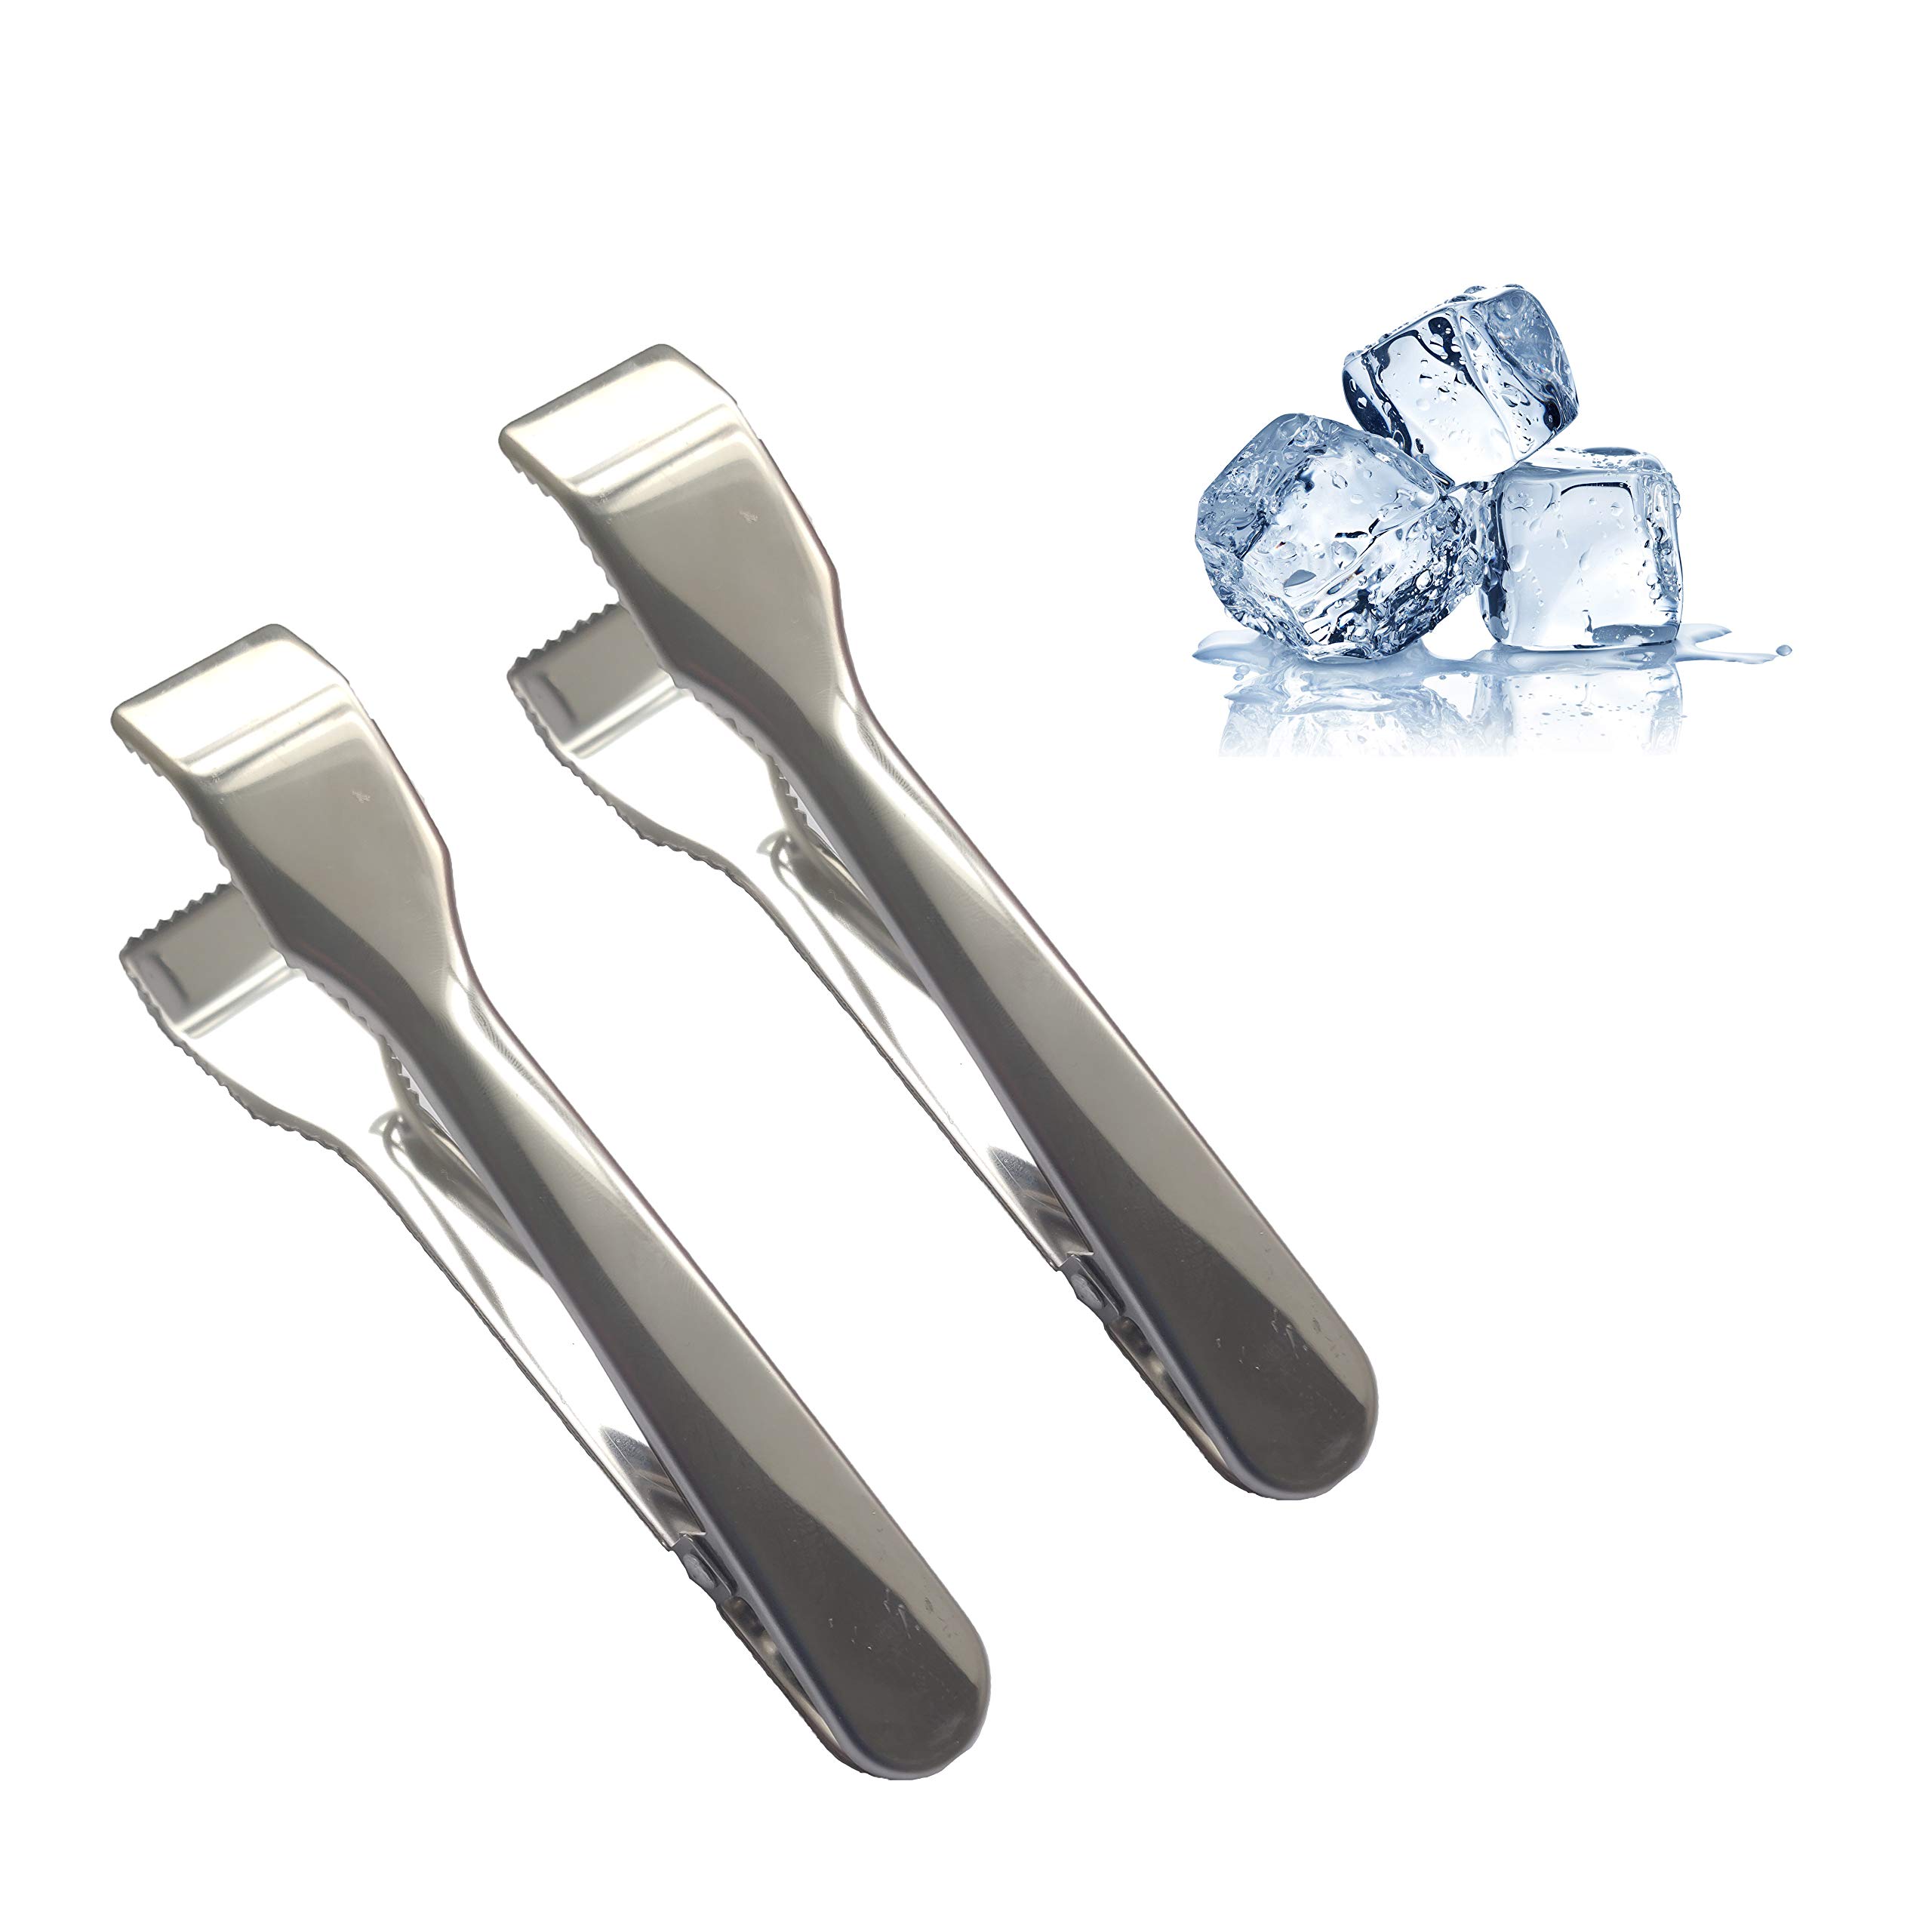 TOONEV Stainless Steel Ice Tongs with Sawteeth